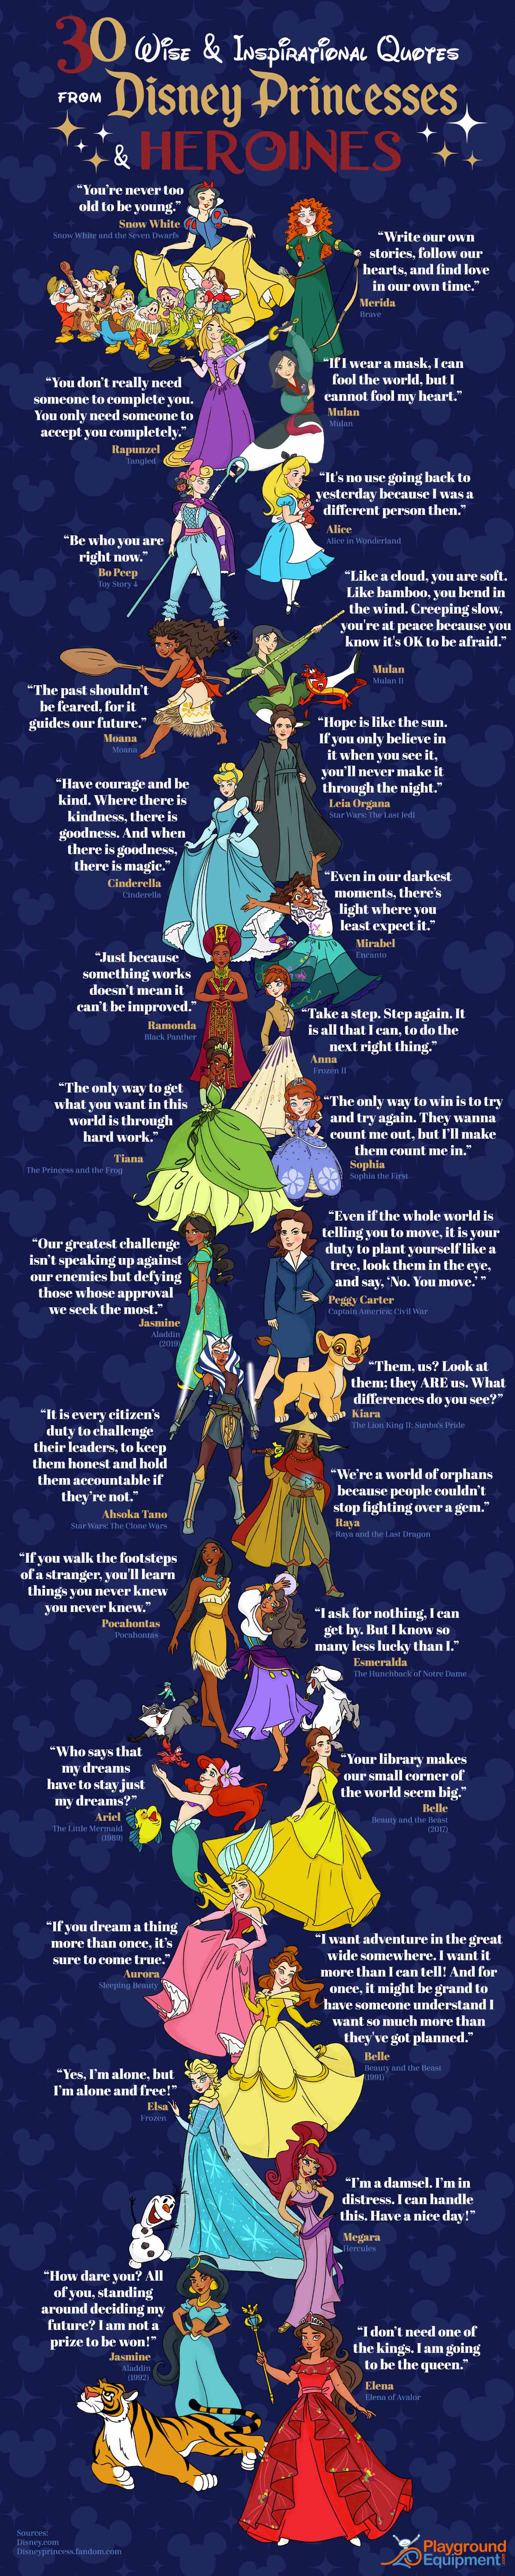 30 Wise & Inspirational Quotes from Disney Princesses and Heroines